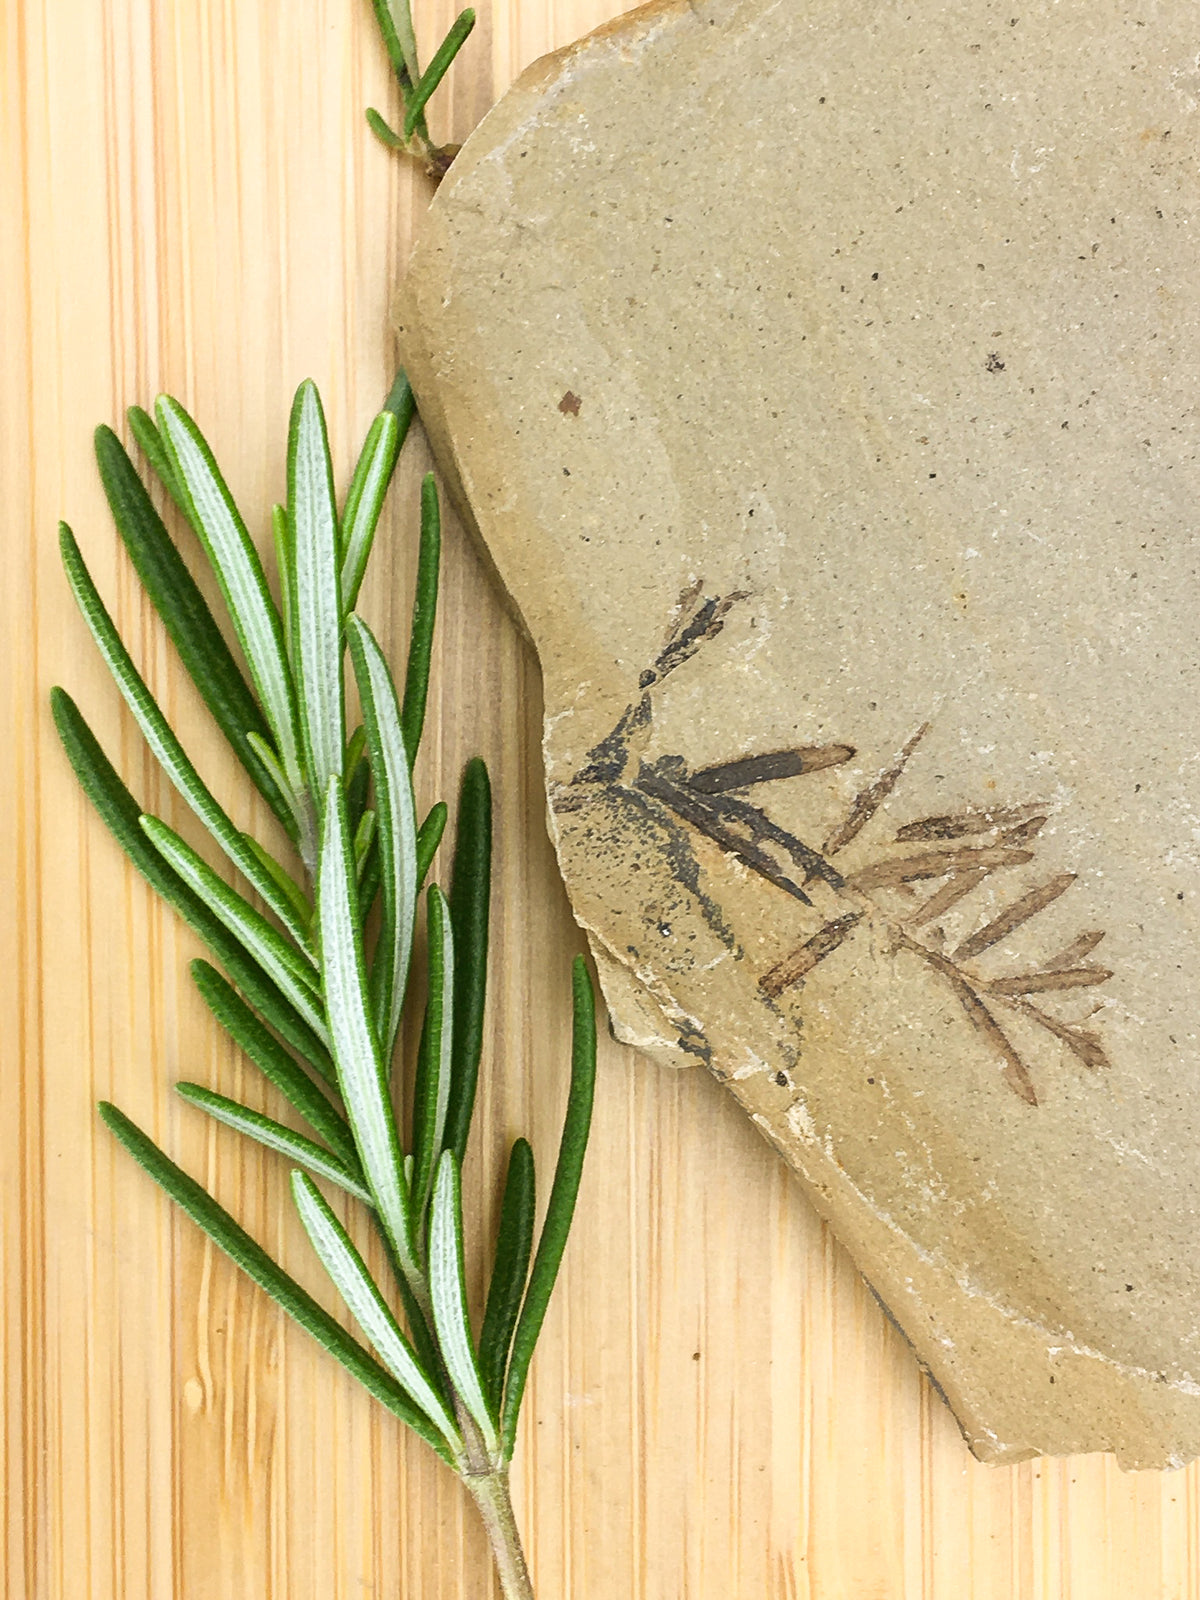 Metasequoia leaf on a flat grey sedimentary rock. The  fossil is lying on a grained wood surface, it is contrasted with a sprig of fresh rosemary